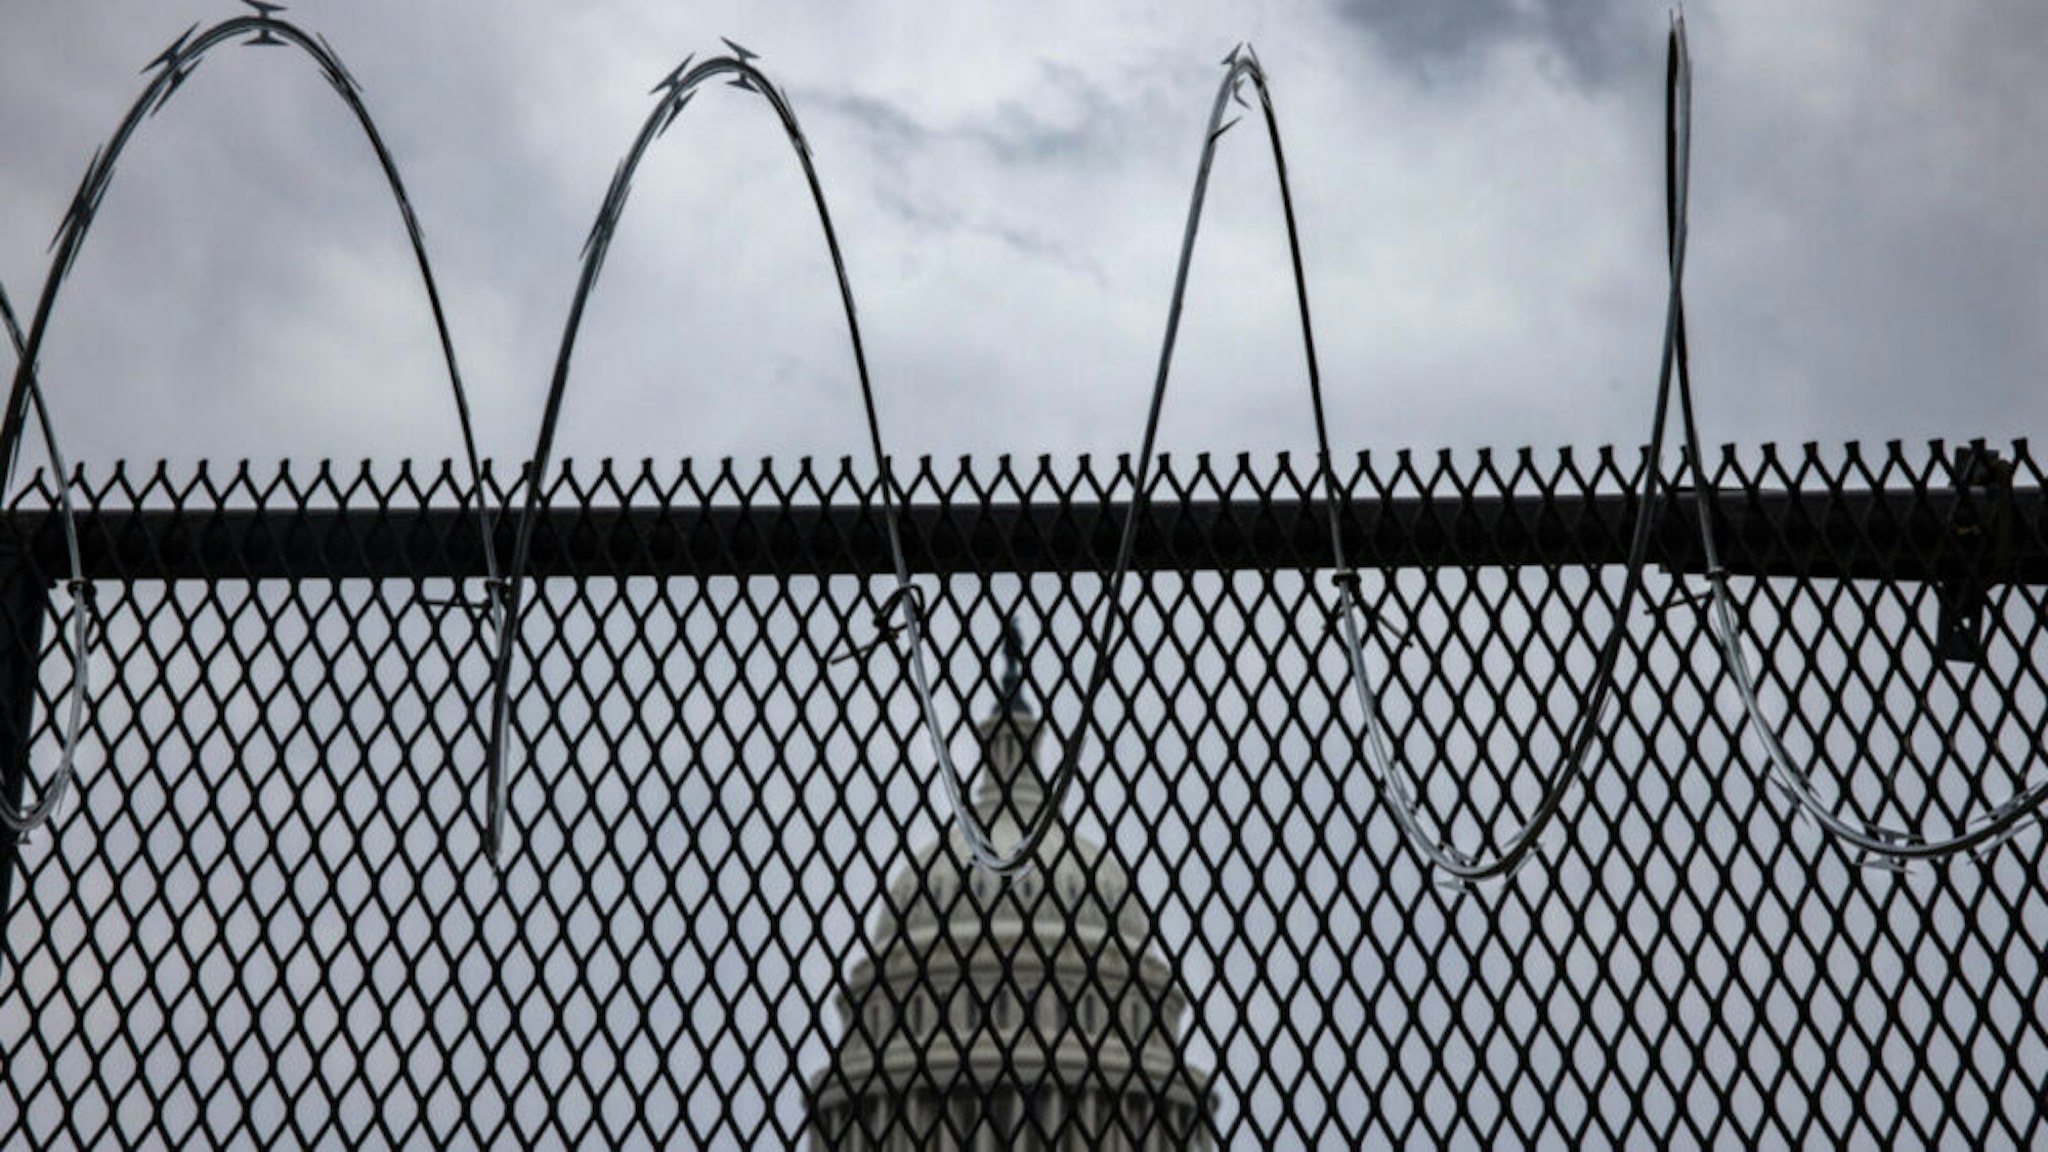 Razor wire is seen after being installed on the fence surrounding the grounds of the U.S. Capitol on January 15, 2021 in Washington, DC.